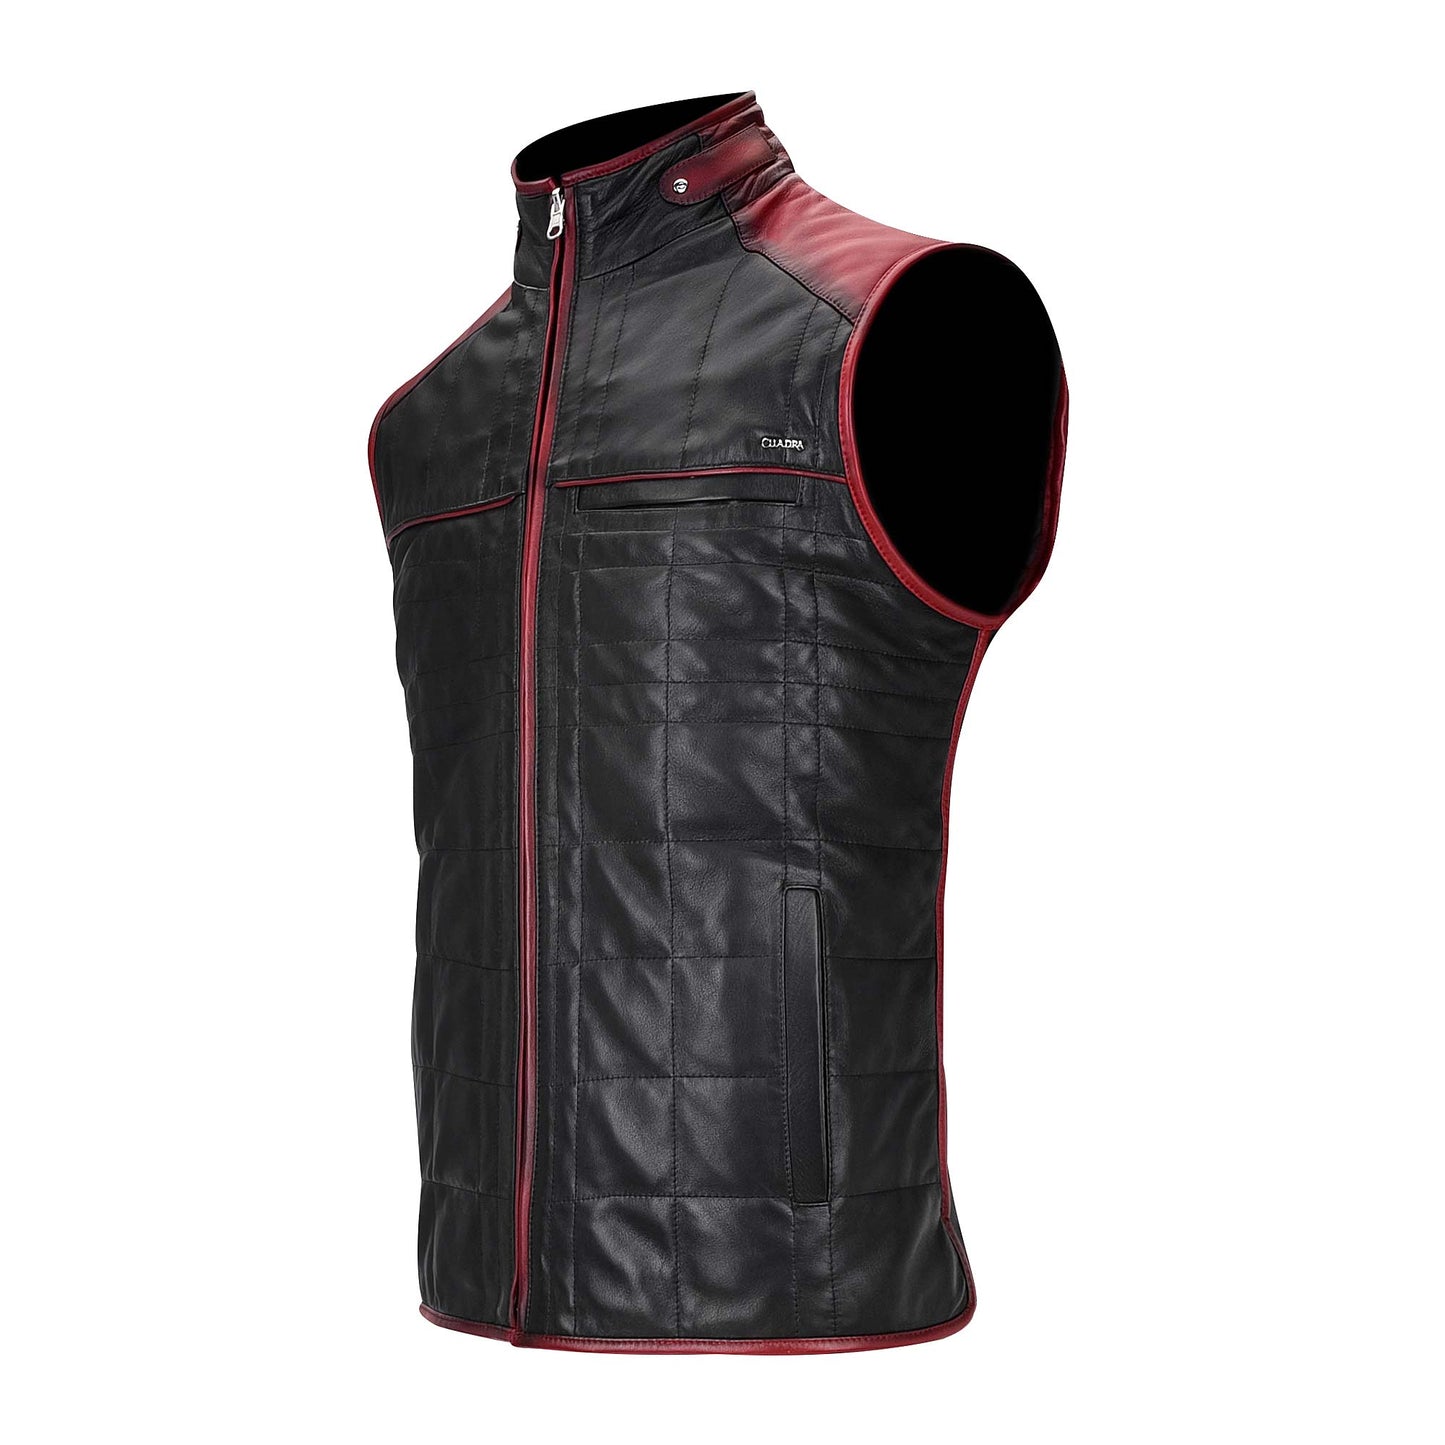 Black leather reversible vest with red touches